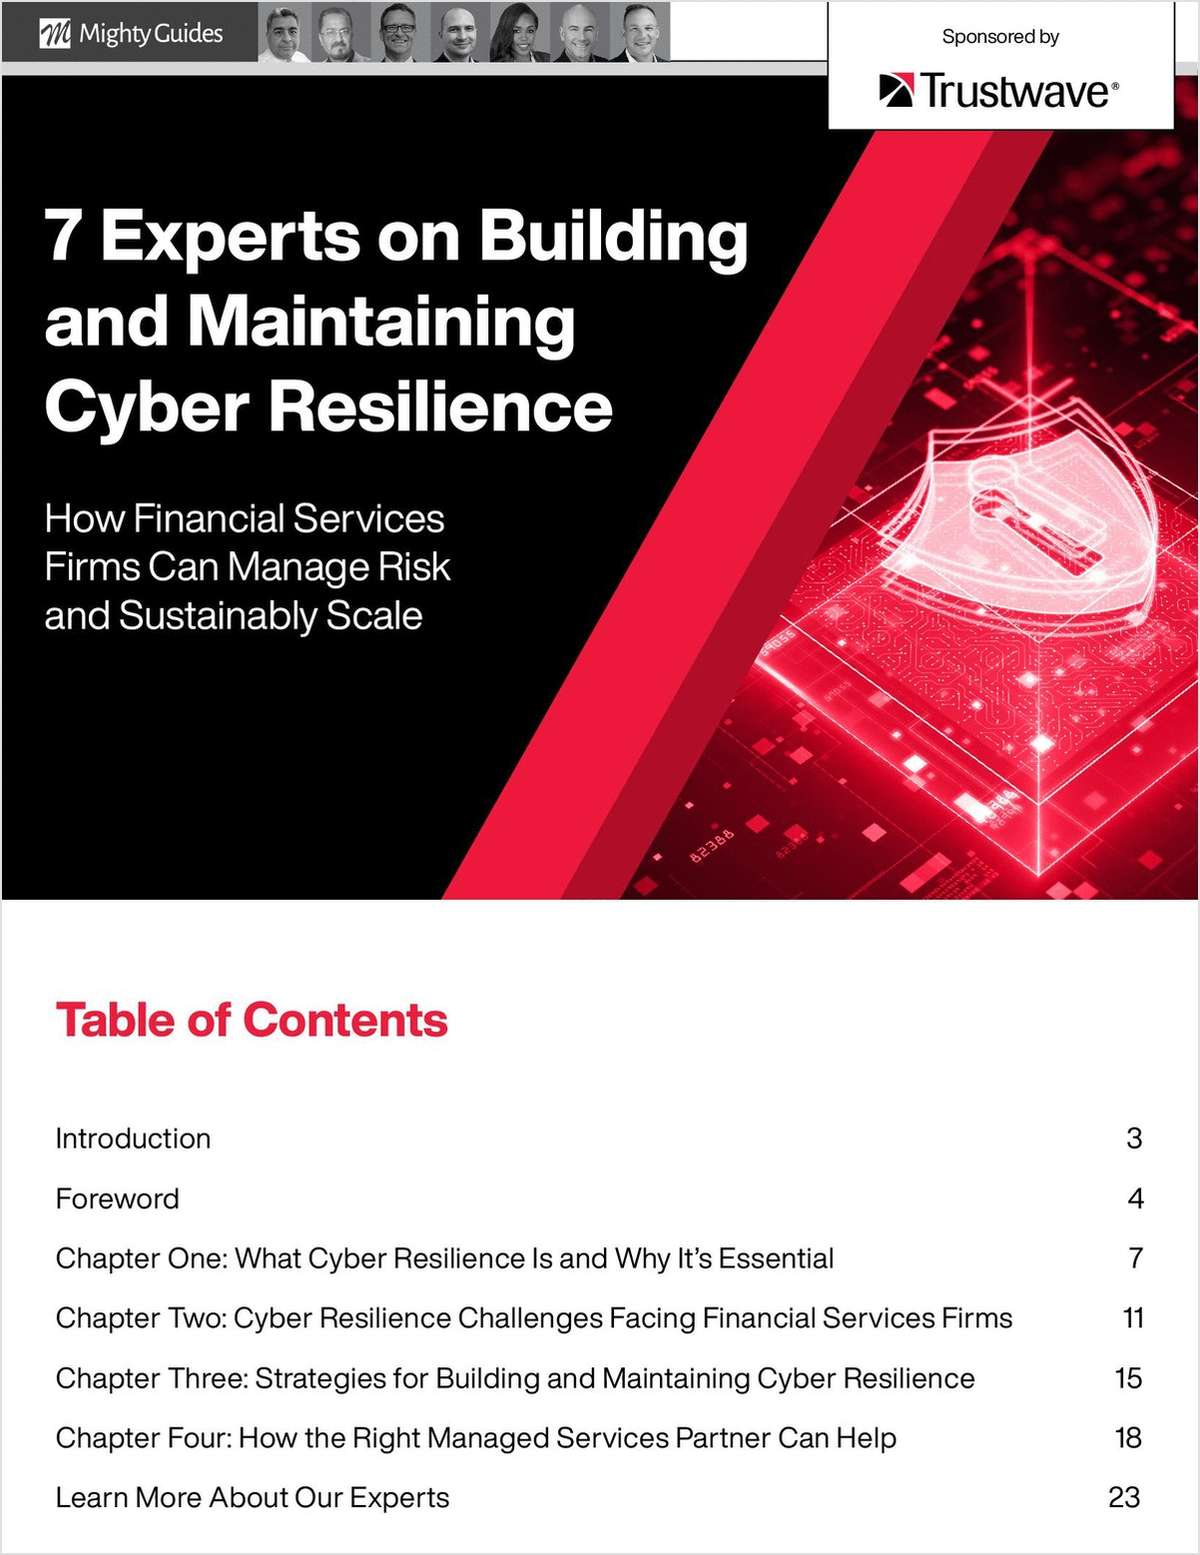 7 Experts on Building and Maintaining Cyber Resilience